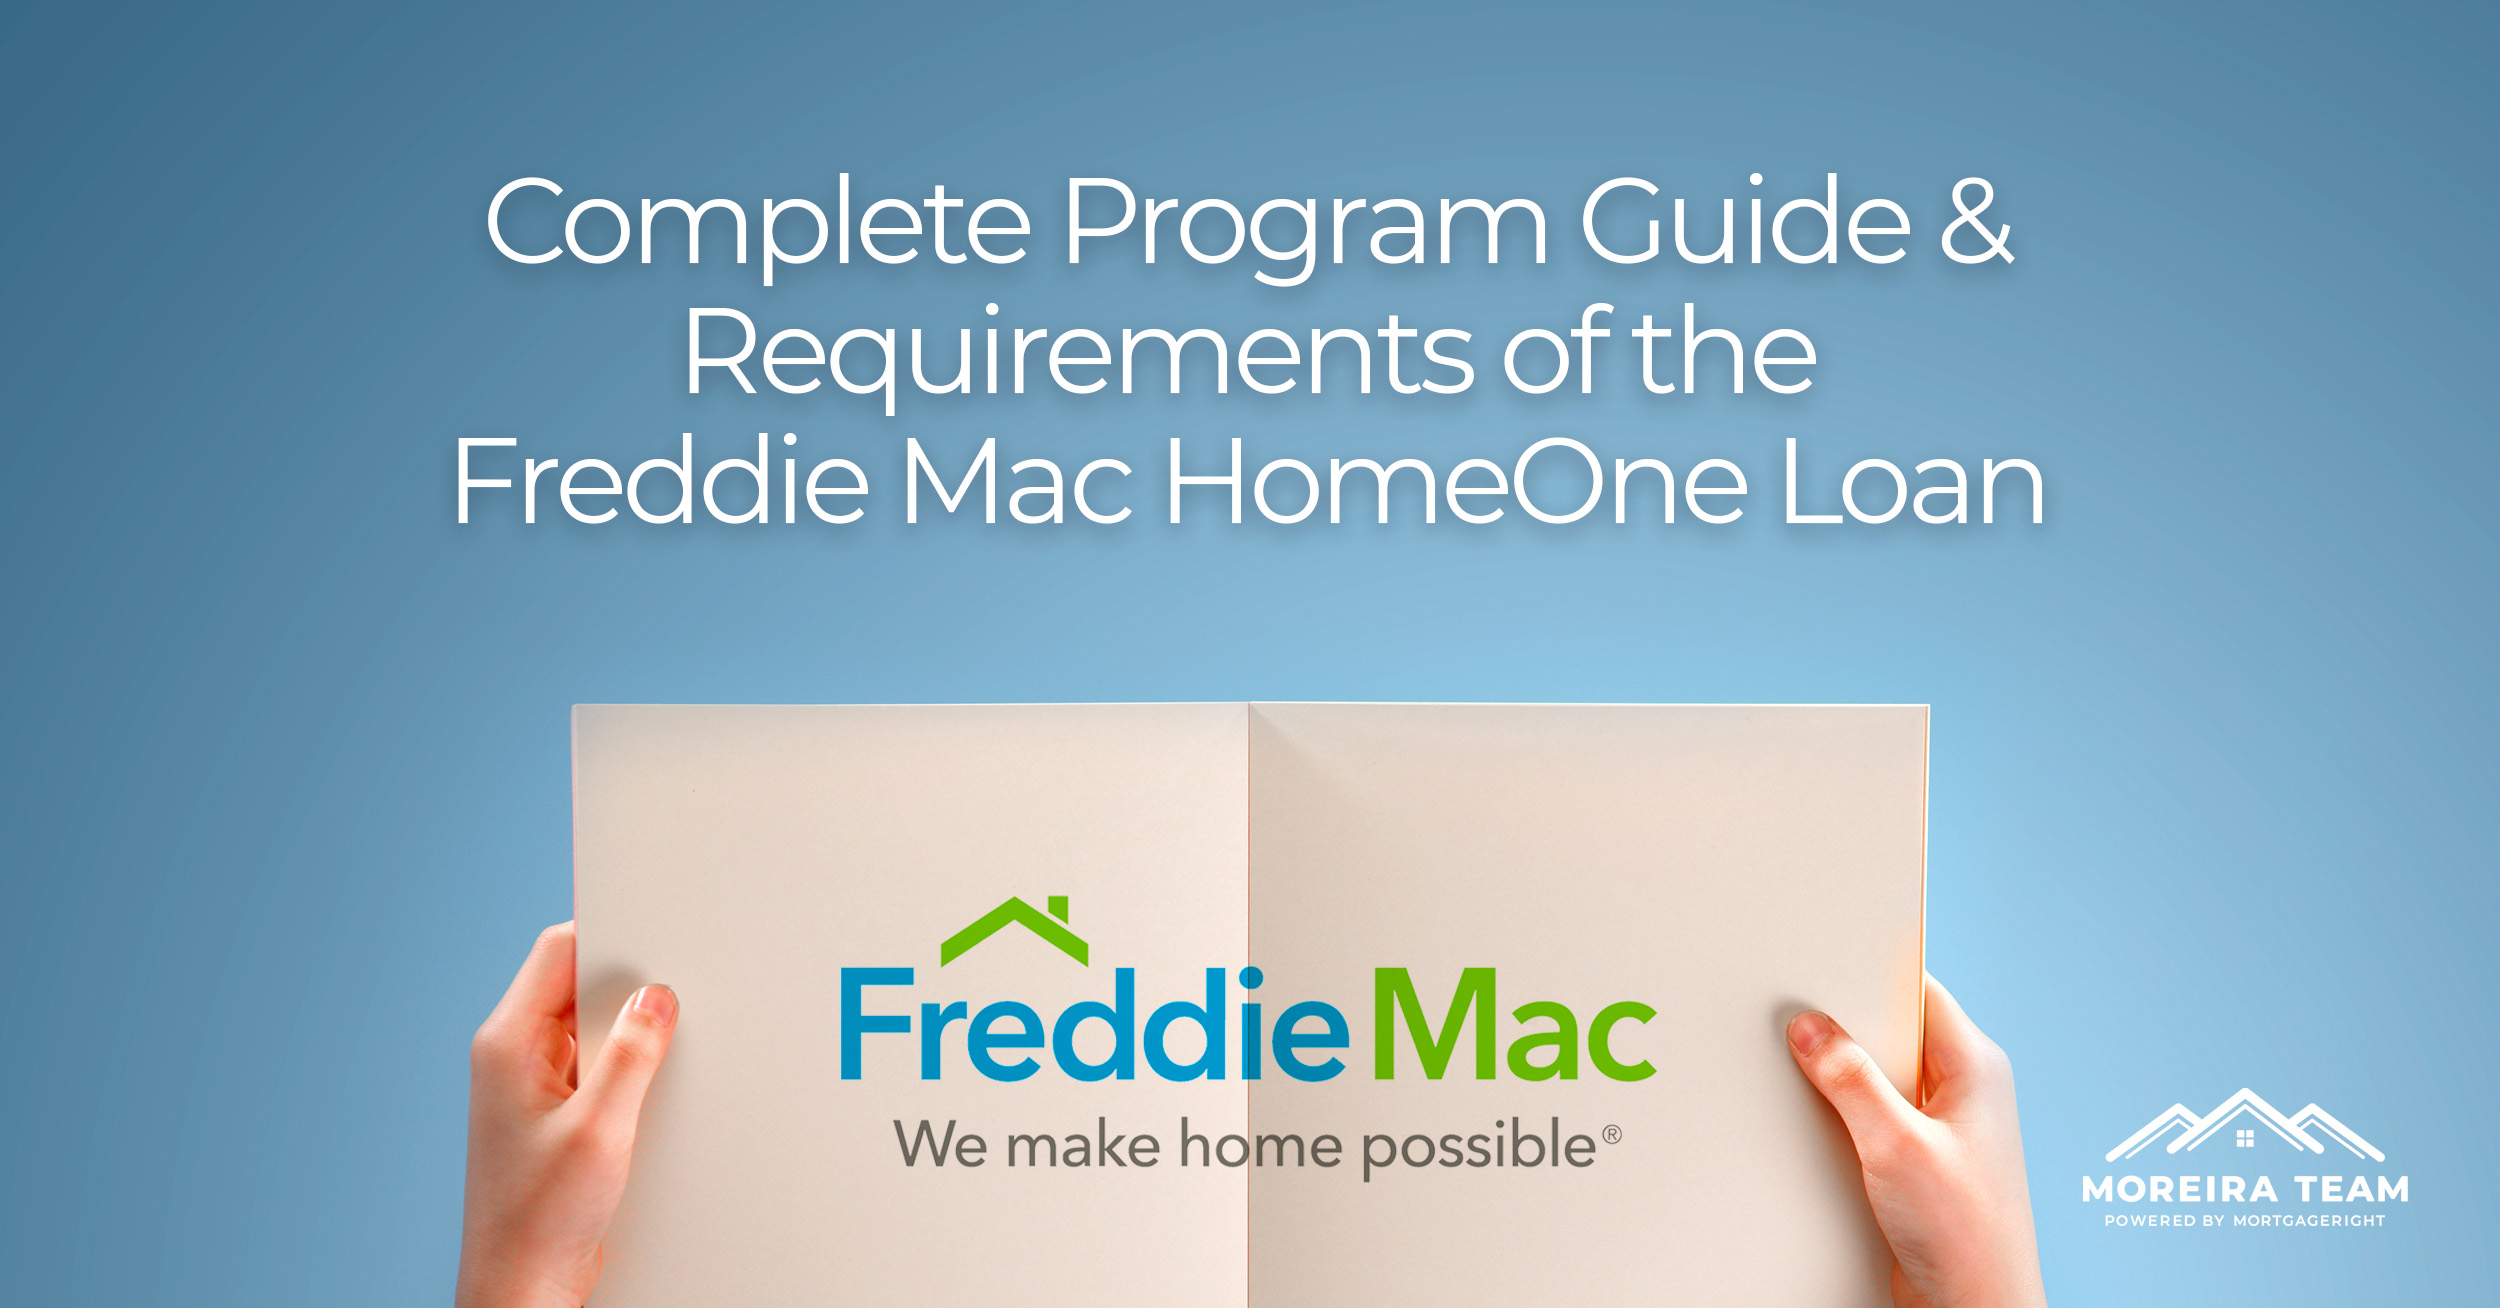 Complete Program Guide & Requirements of the Freddie Mac HomeOne Loan